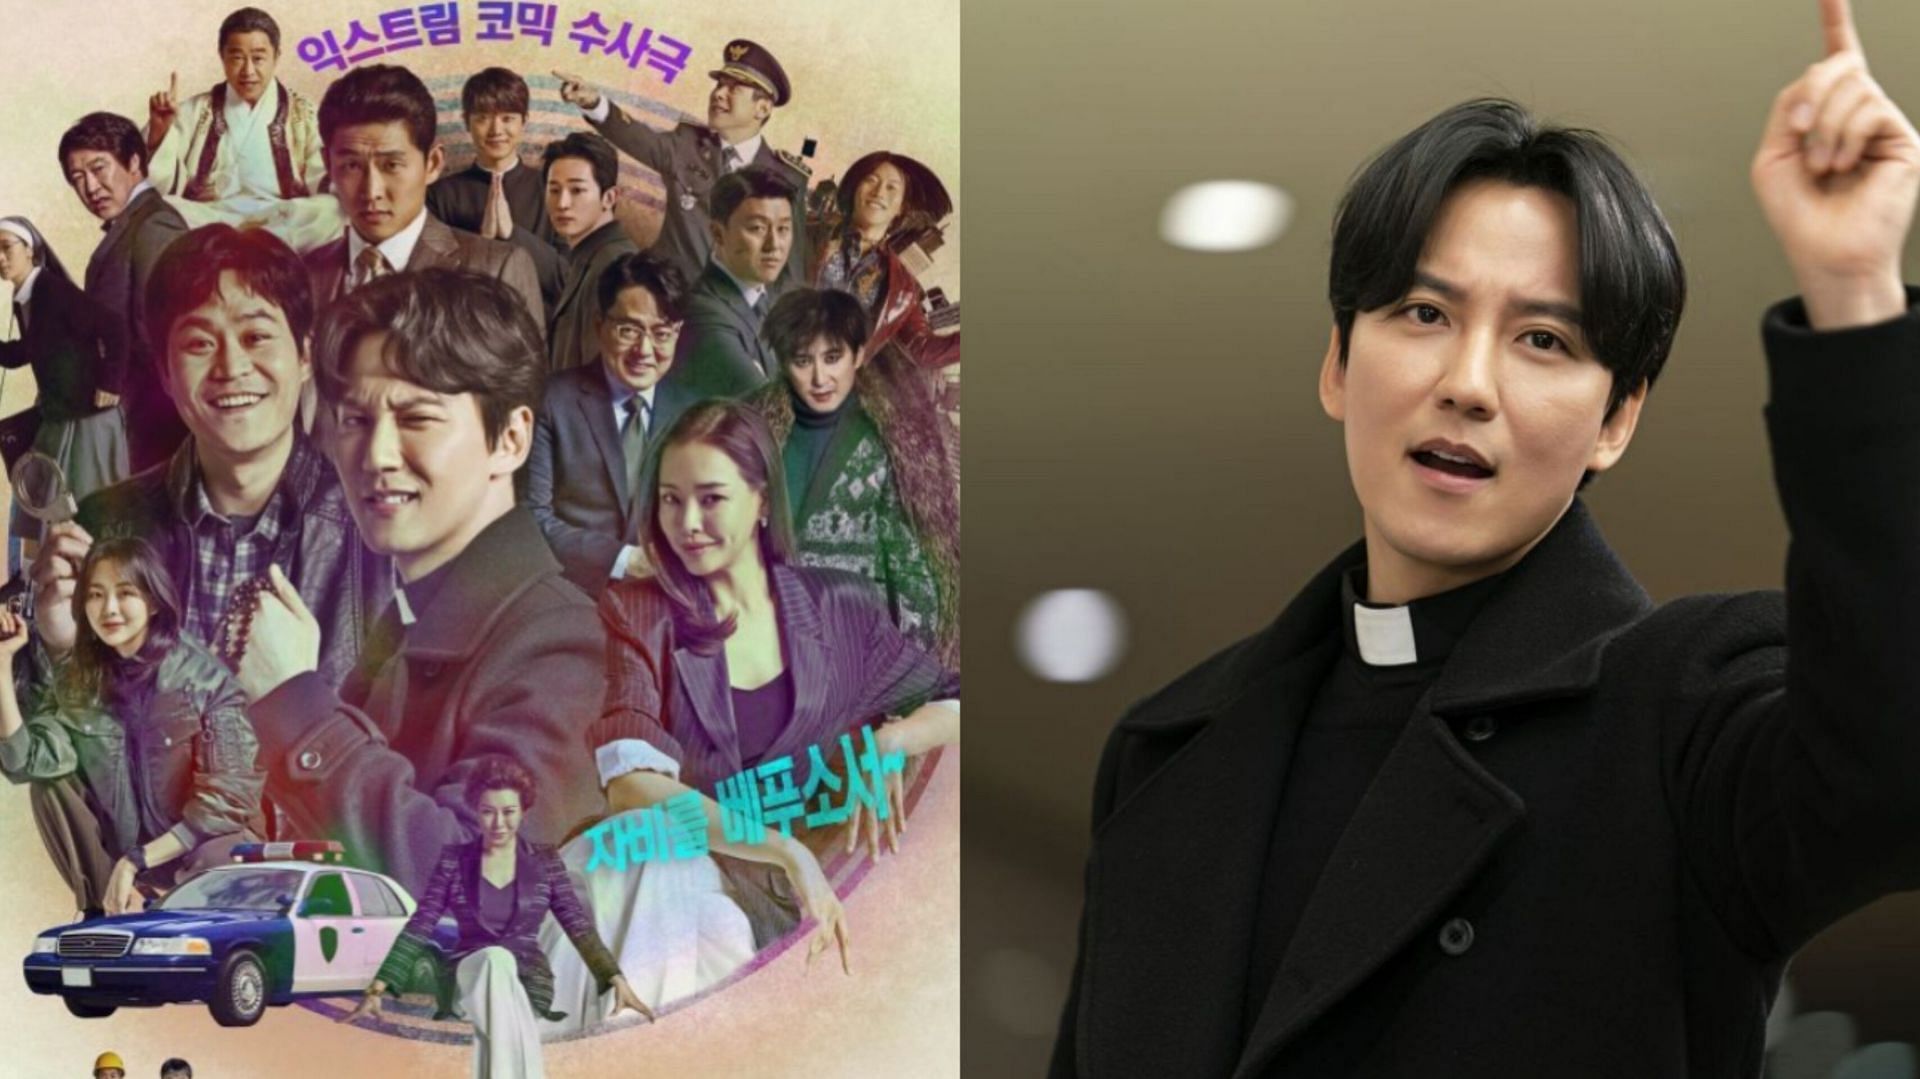 The Fiery Priest poster and featuring Kim Nam-gil (Image via SBS)